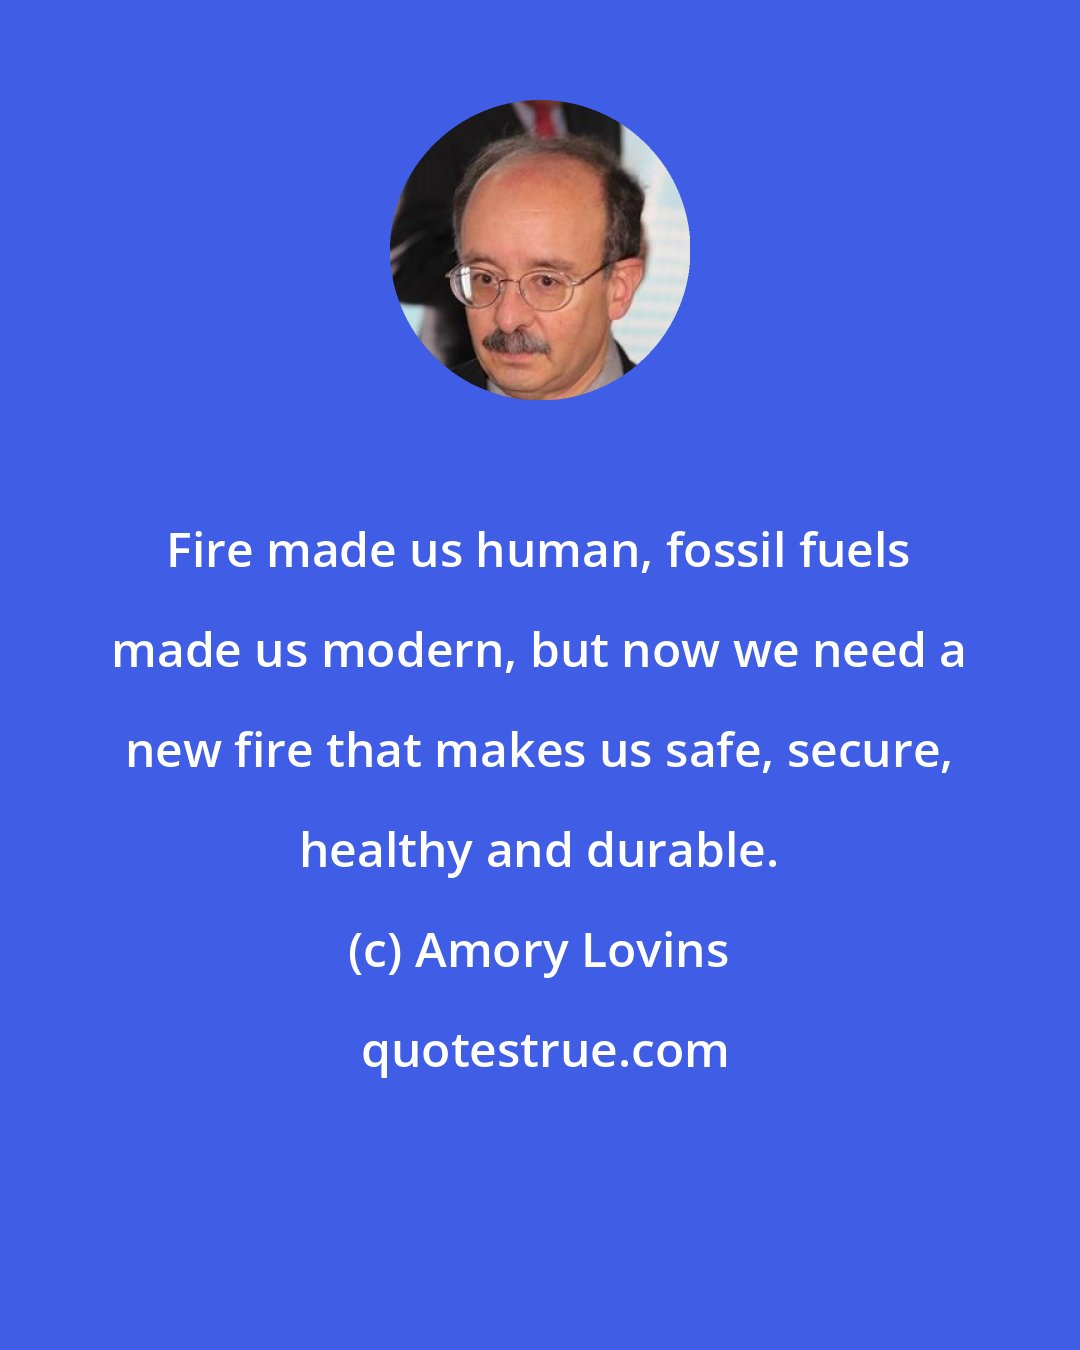 Amory Lovins: Fire made us human, fossil fuels made us modern, but now we need a new fire that makes us safe, secure, healthy and durable.